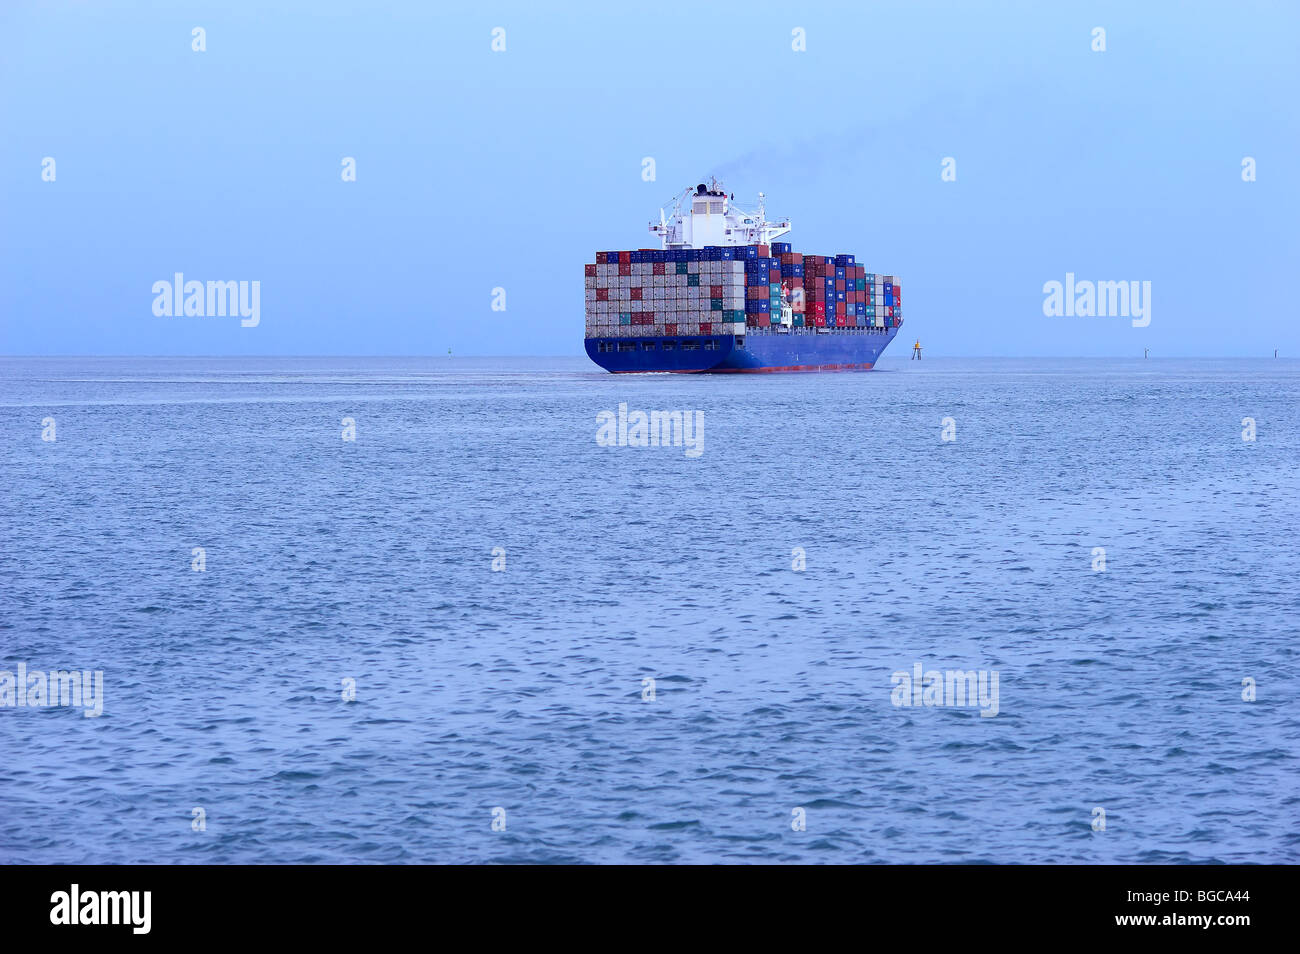 Container ship heading out to sea Stock Photo